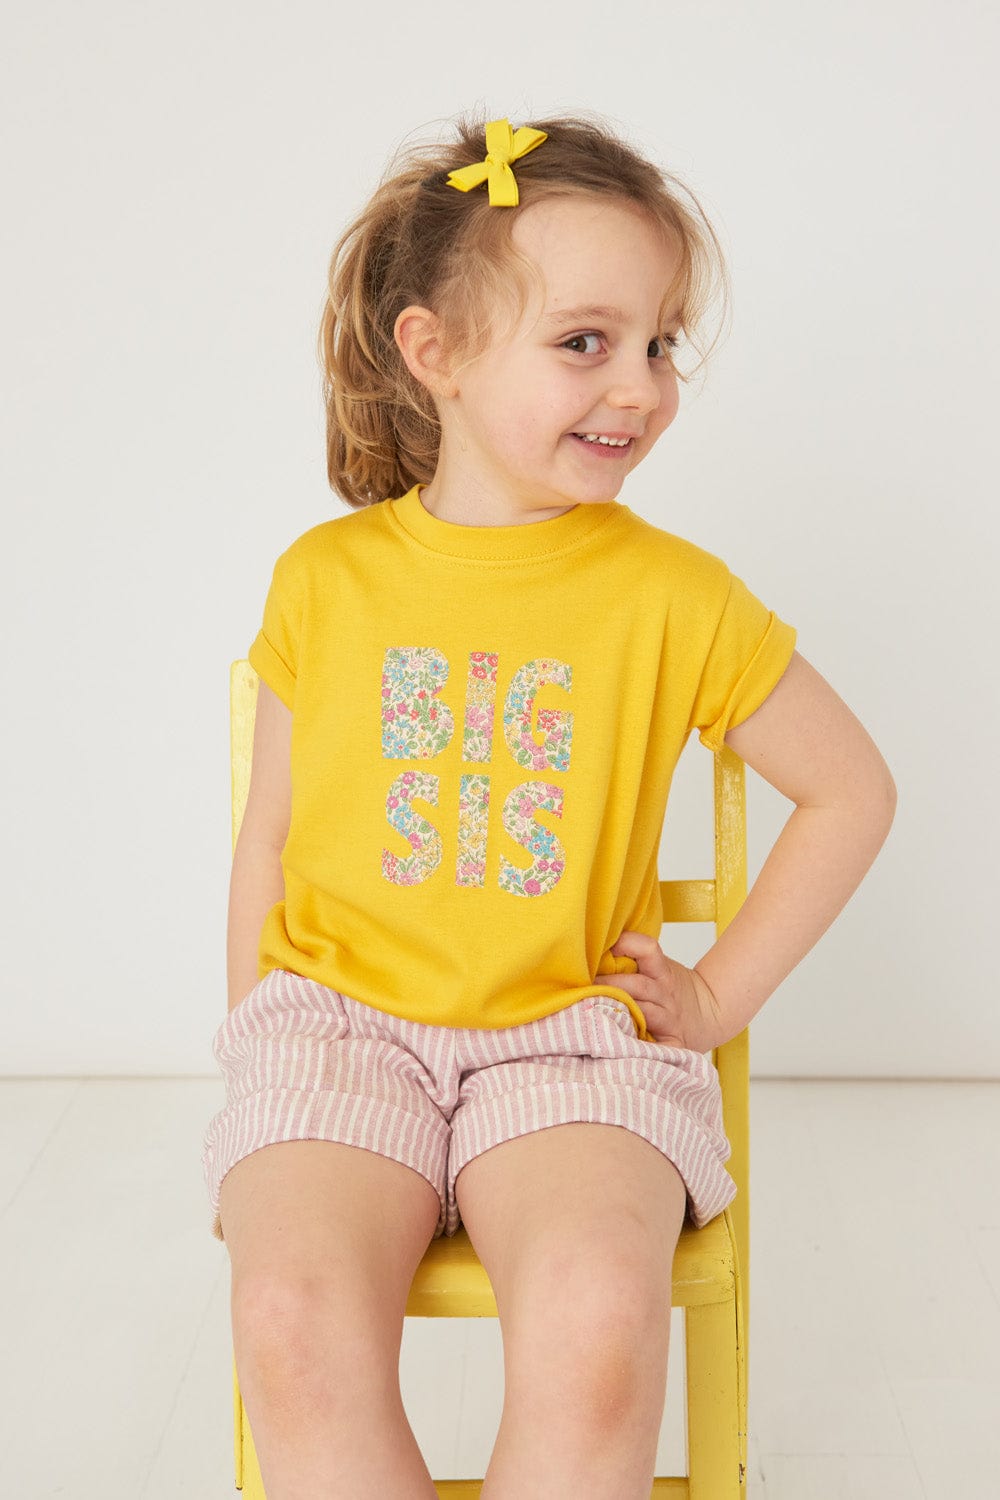 Magnificent Stanley Tee BIG SIS / BIG BRO Yellow T-Shirt in Choice of Liberty Print